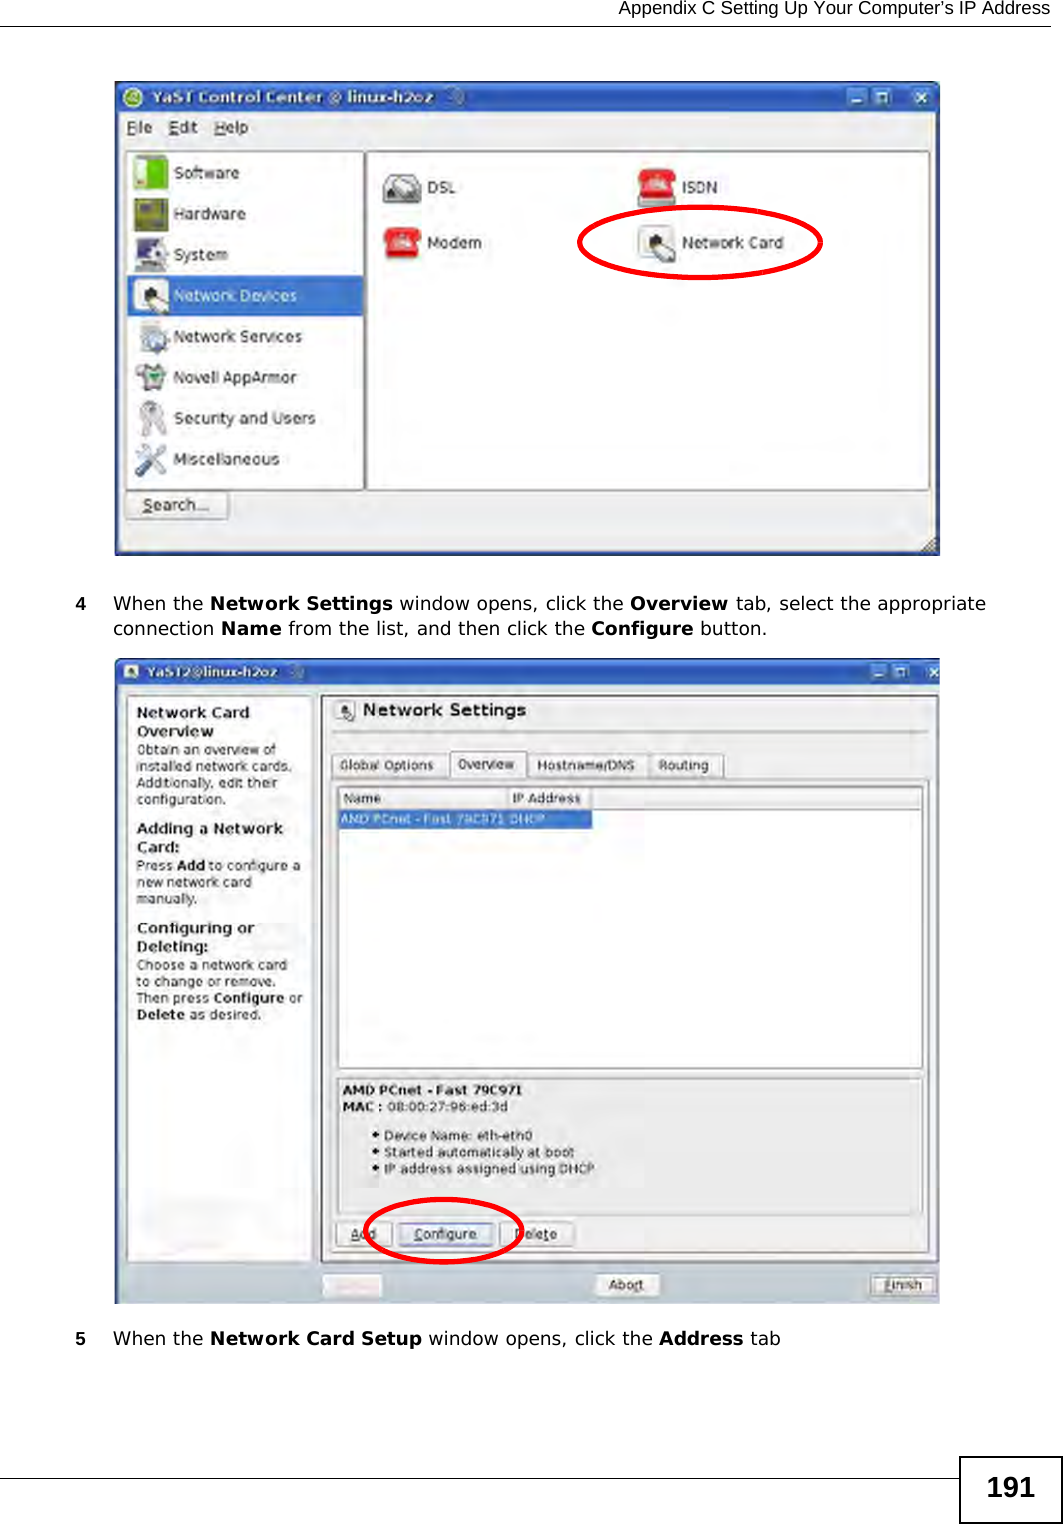  Appendix C Setting Up Your Computer’s IP Address1914When the Network Settings window opens, click the Overview tab, select the appropriate connection Name from the list, and then click the Configure button. 5When the Network Card Setup window opens, click the Address tab